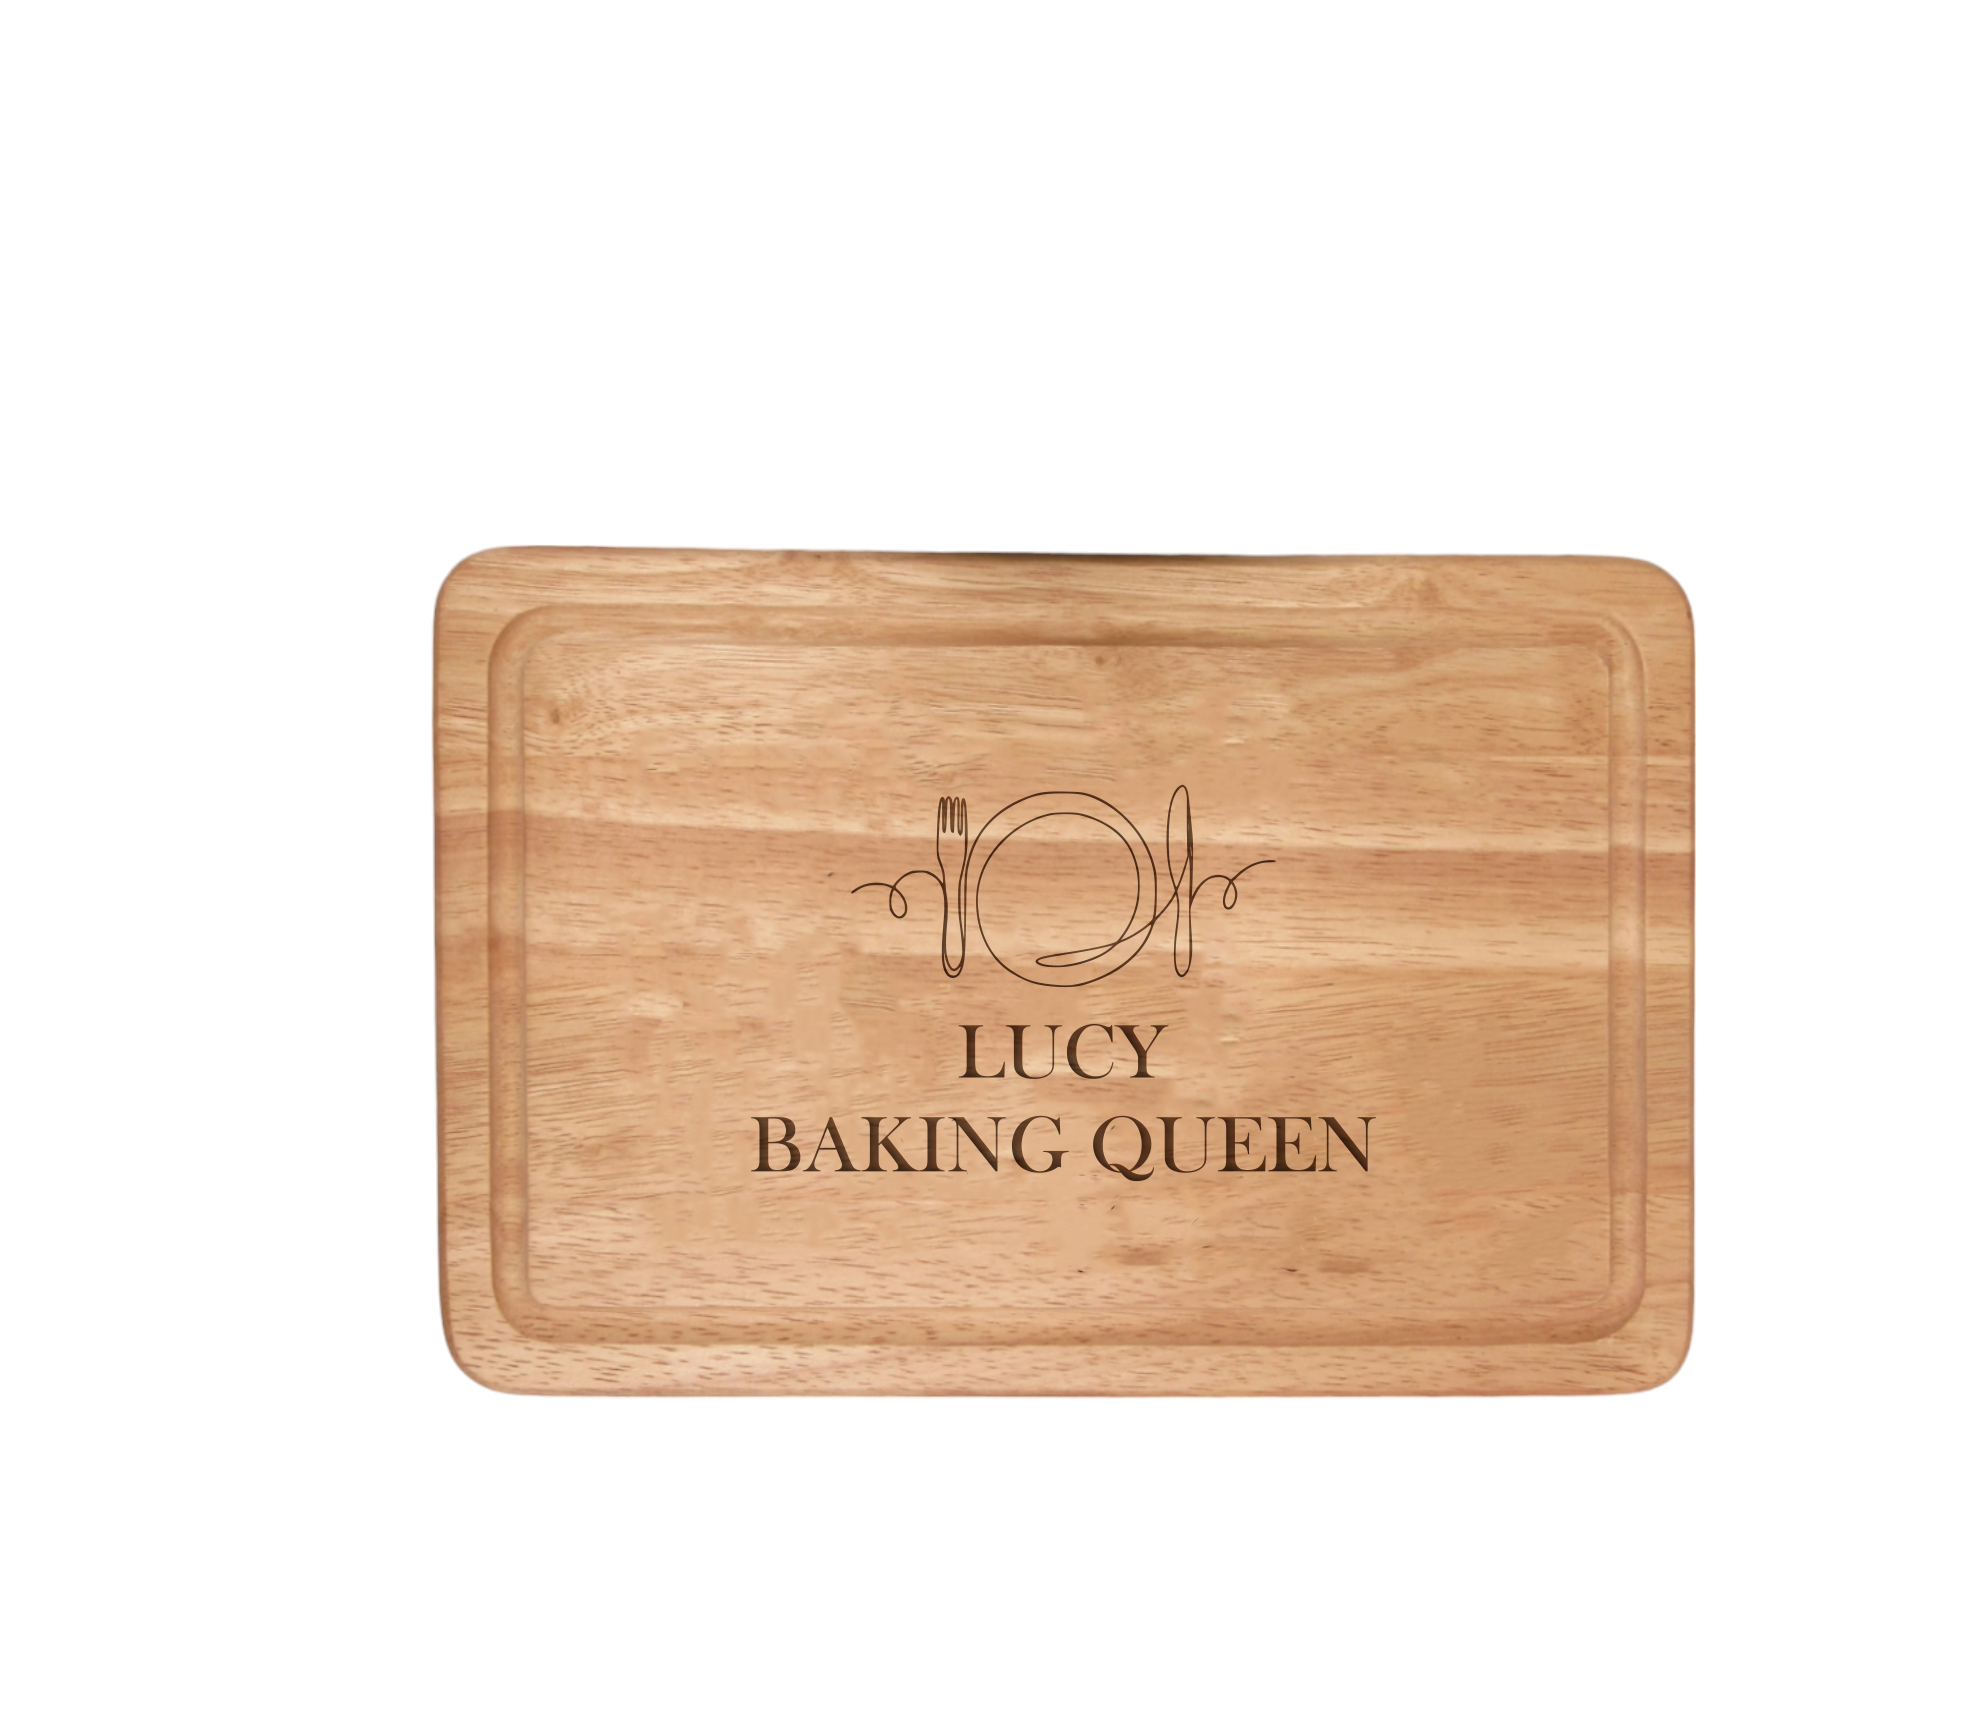 Elevate your kitchen style with our Personalised Chopping Board Knife & Fork Design. Engrave 2 lines of text (max 20 characters each in caps) on this 300mmX200mm premium wood board. Perfect for housewarmings or special occasions, it adds personalized charm to your cooking. Versatile and classy, enjoy a unique culinary experience. Reminder: Hand-wash only for enduring elegance.